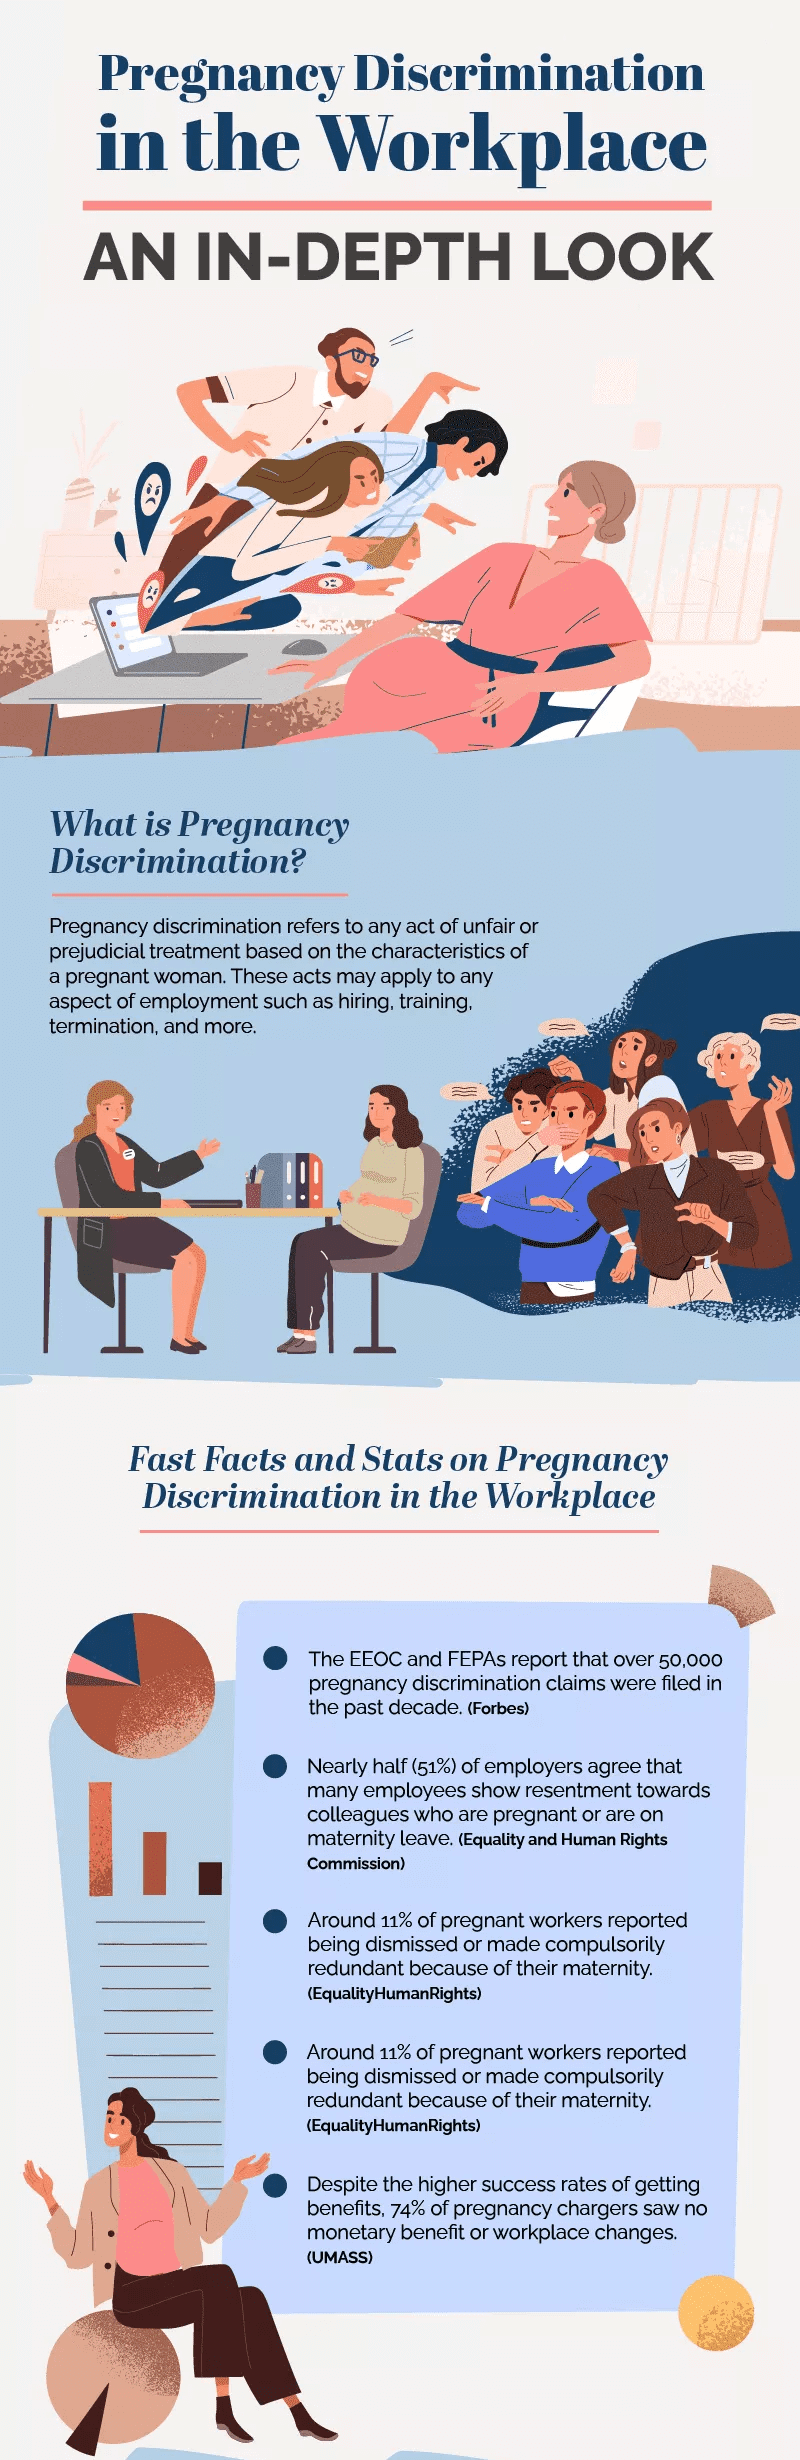 Pregnancy Discrimination in the Workplace